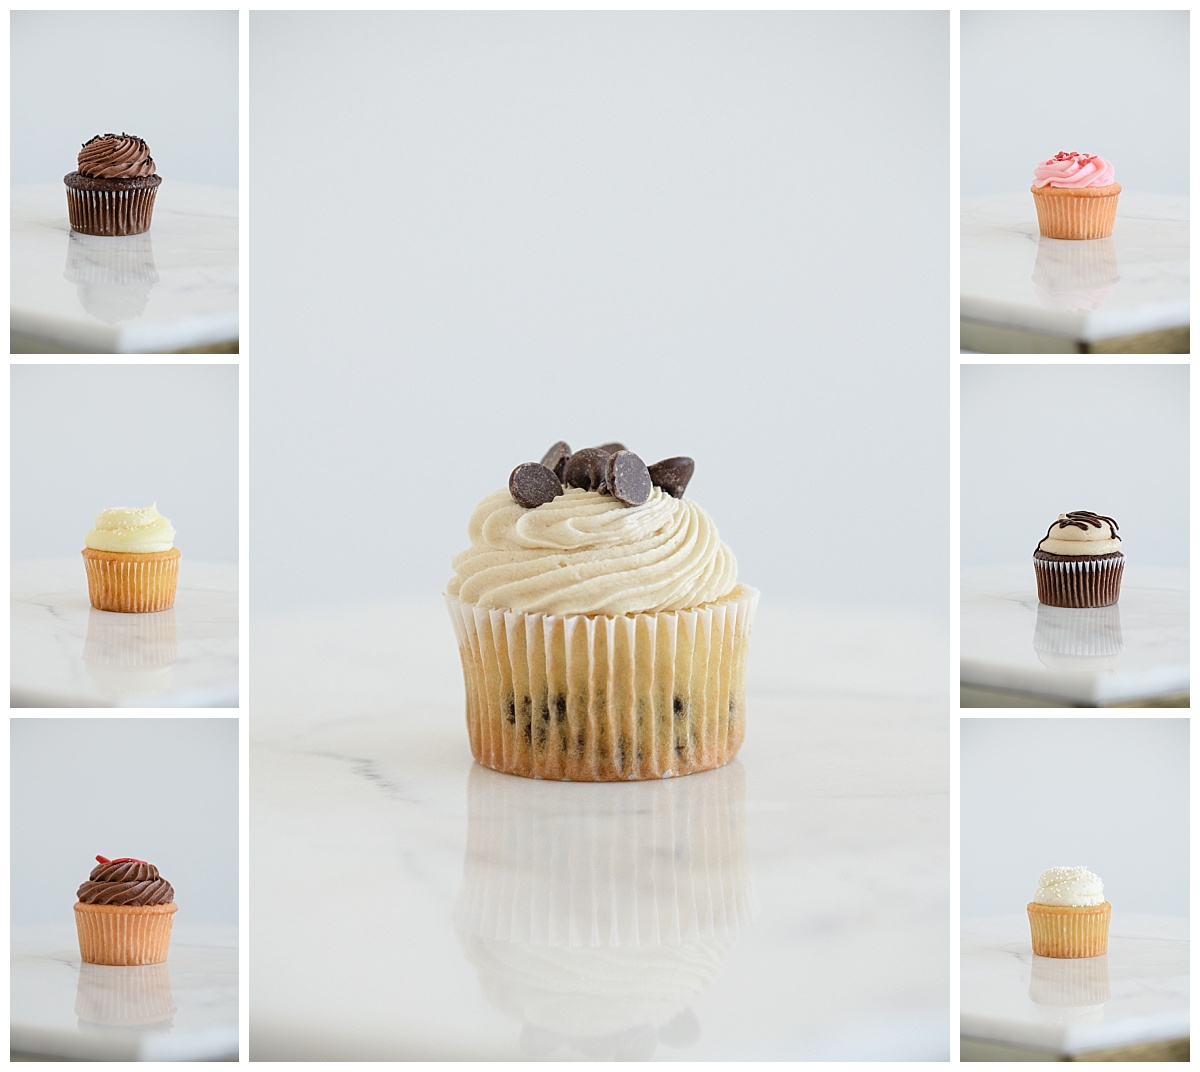 Pictures of cupcakes for Denver Product Photography by a Denver branding photographer.